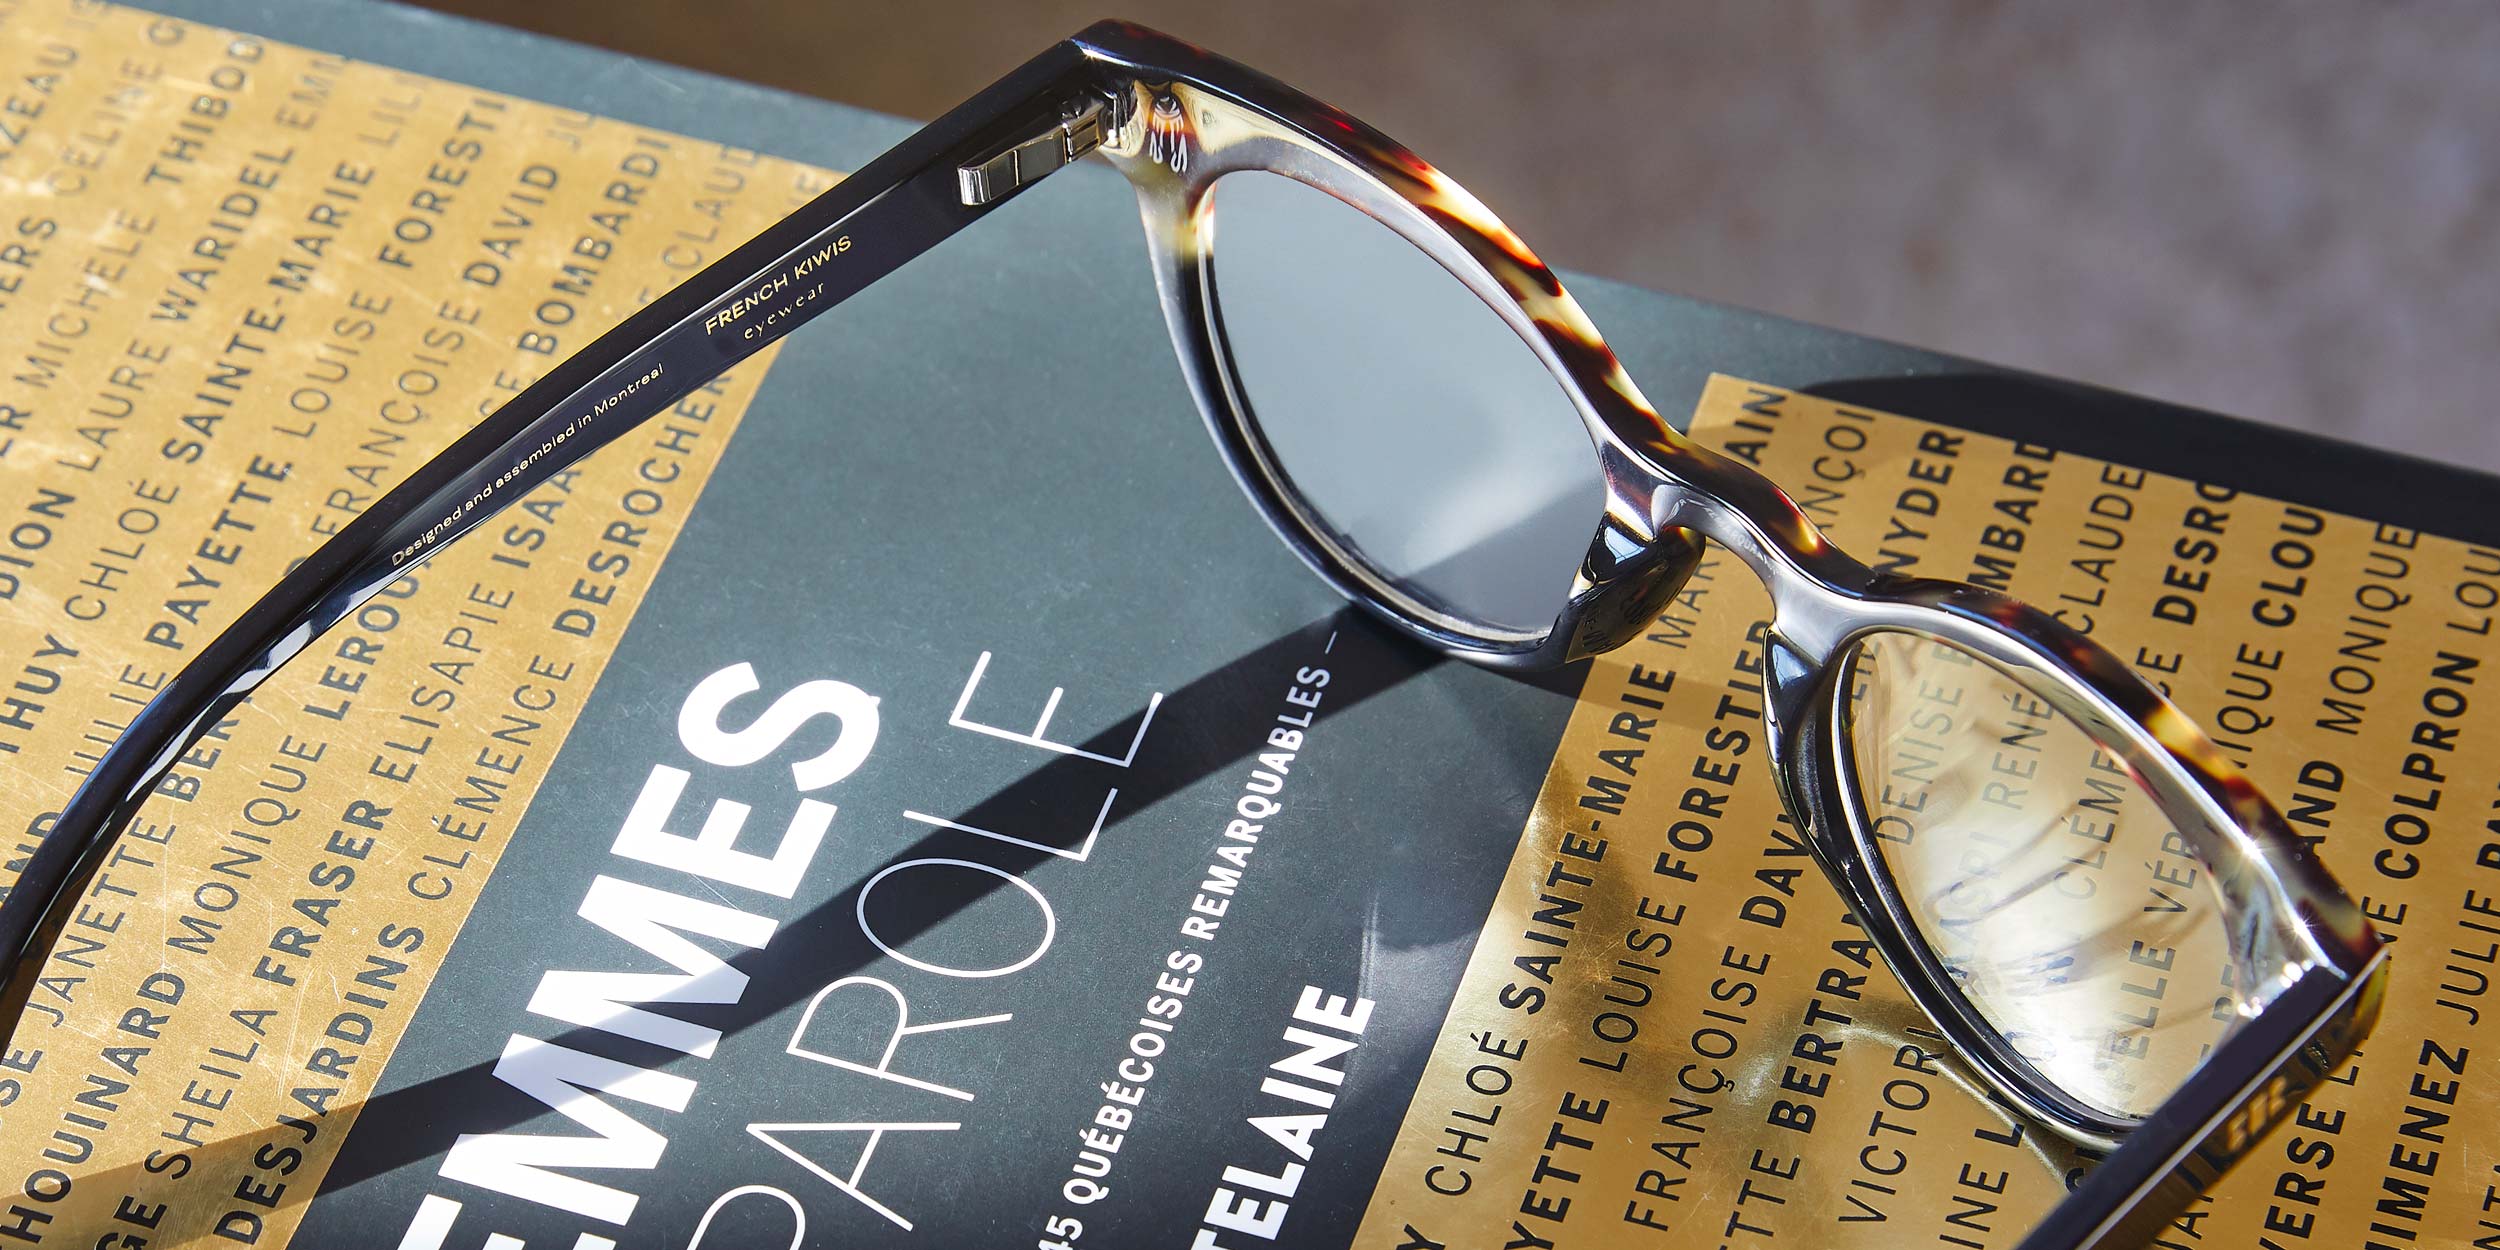 Photo Details of Céline Cyan & Light Tortoise Reading Glasses in a room